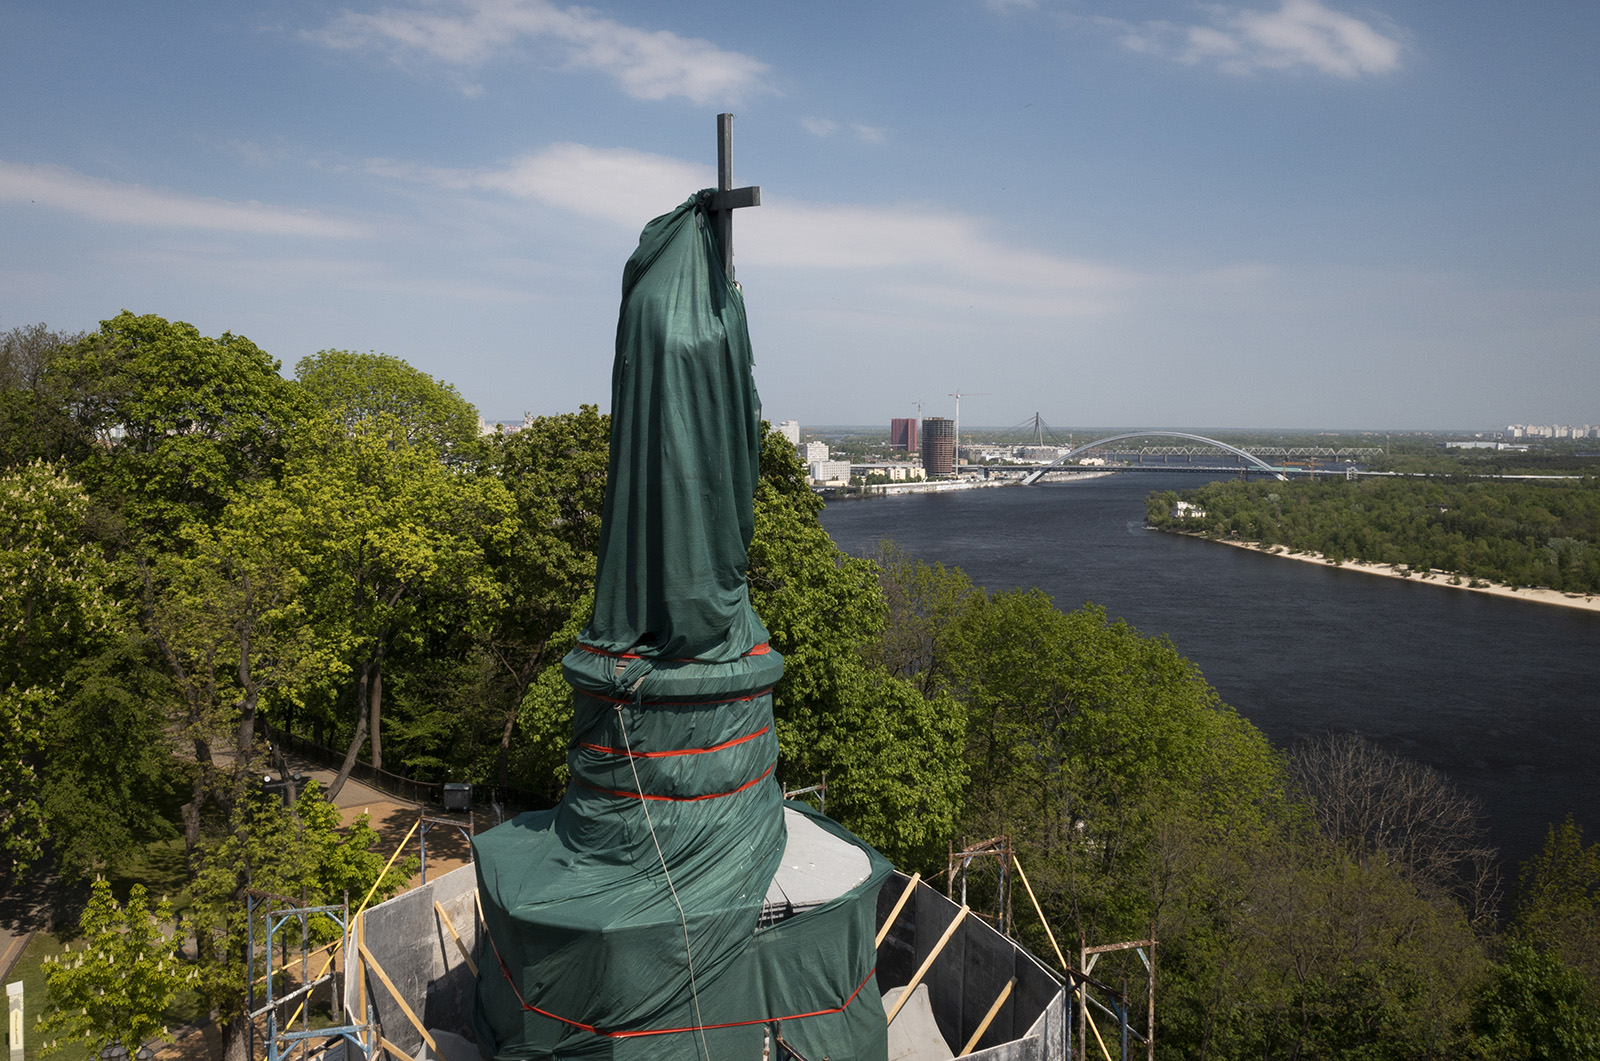 A early 200-year-old monument to legendary Prince Volodymyr, a Kyiv landmark and one of the symbols of the Ukrainian capital, is wrapped to protect it from Russian shelling in Kyiv, Ukraine, Thursday, May 12, 2022. (AP Photo/Efrem Lukatsky)